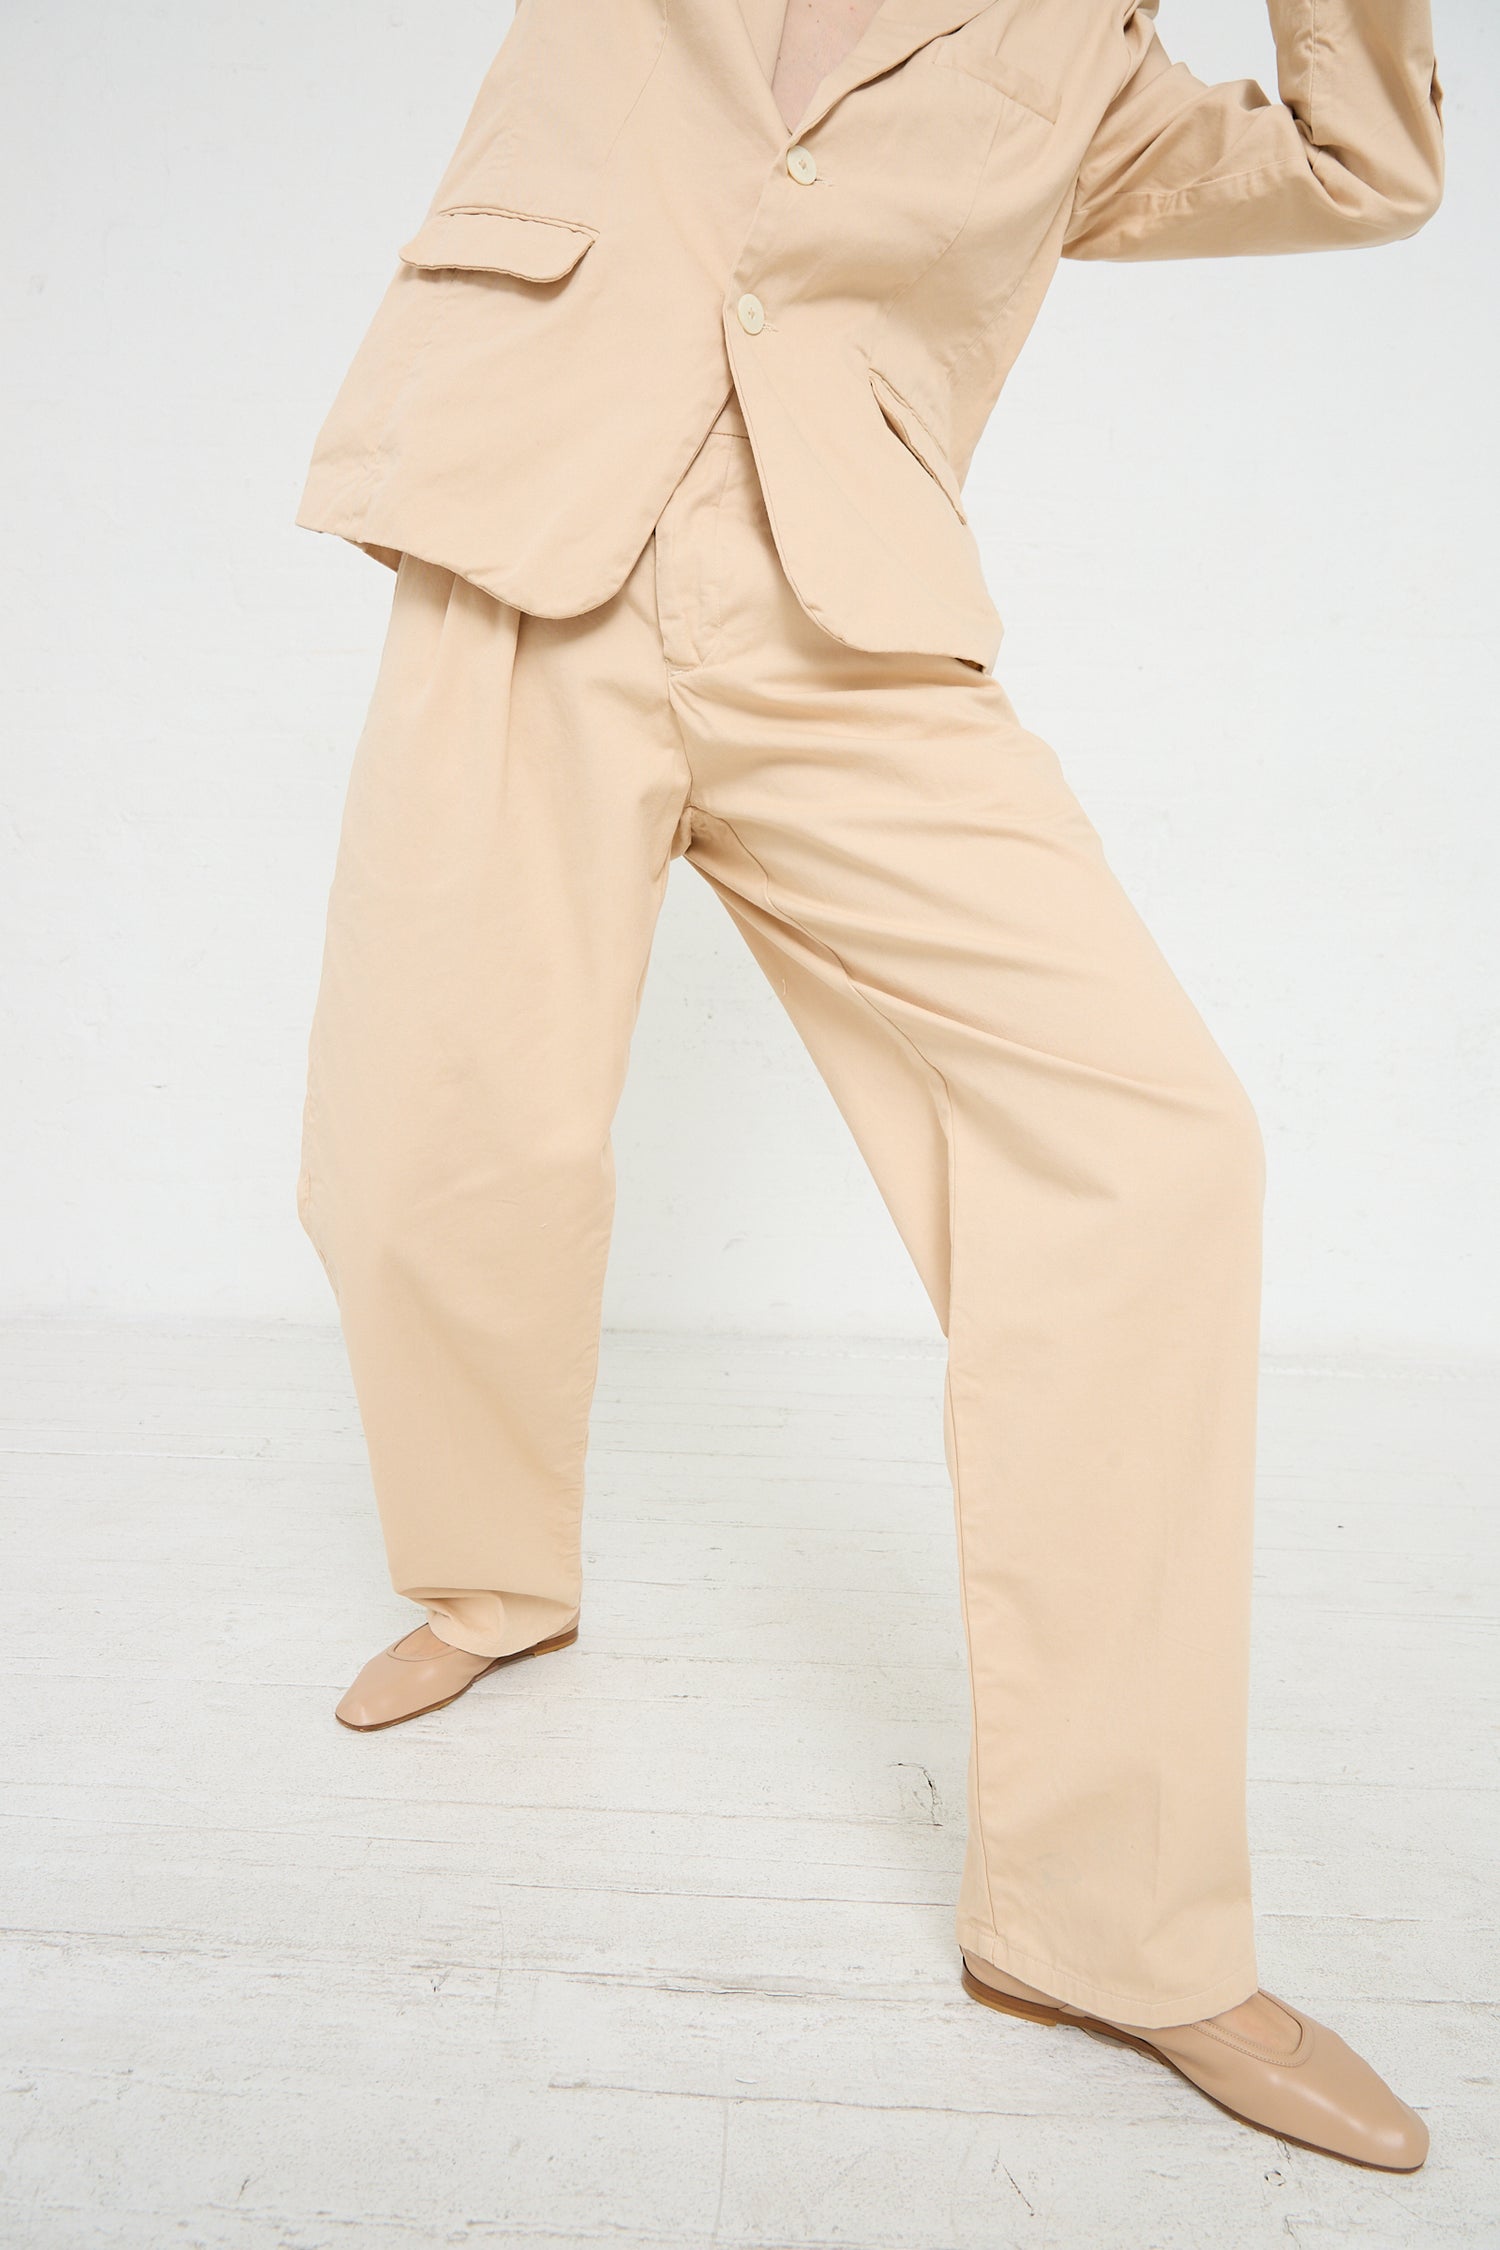 A woman in a tan suit is posing in front of a white wall, showcasing her Jesse Kamm Trouser in Buff.